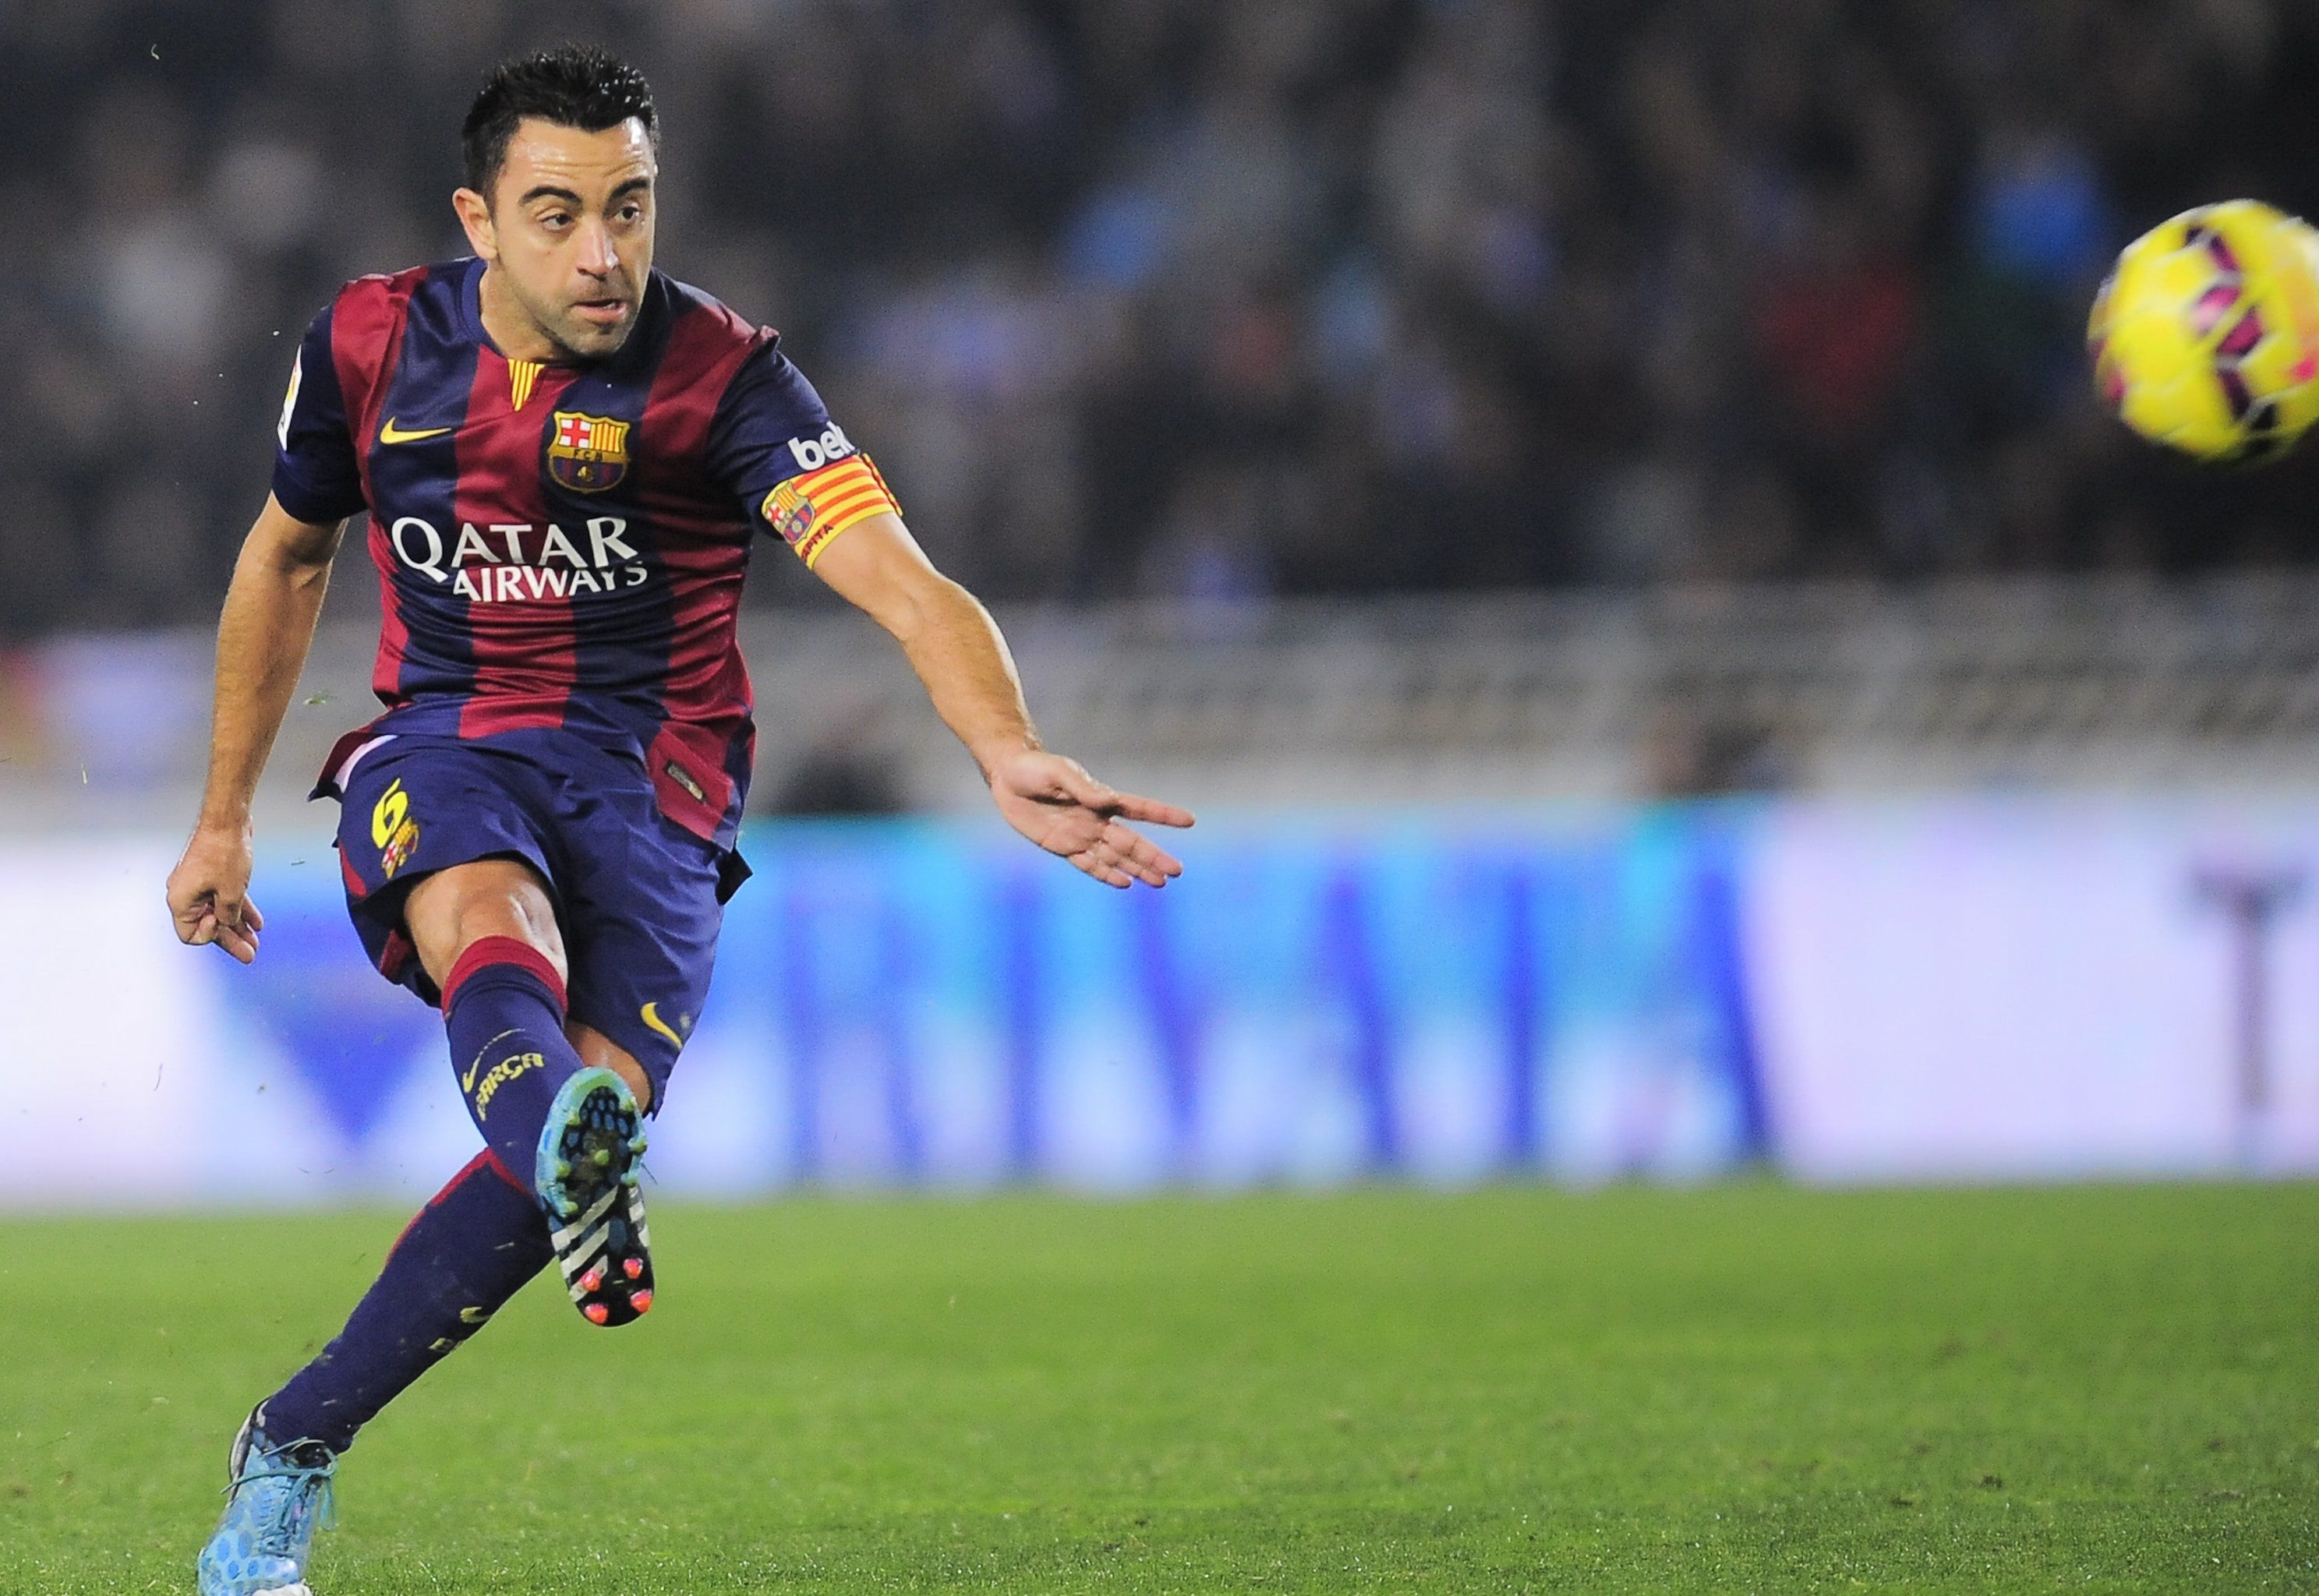 French forward Dembélé talks about Xavi's support before the 2022 World Cup final in Qatar